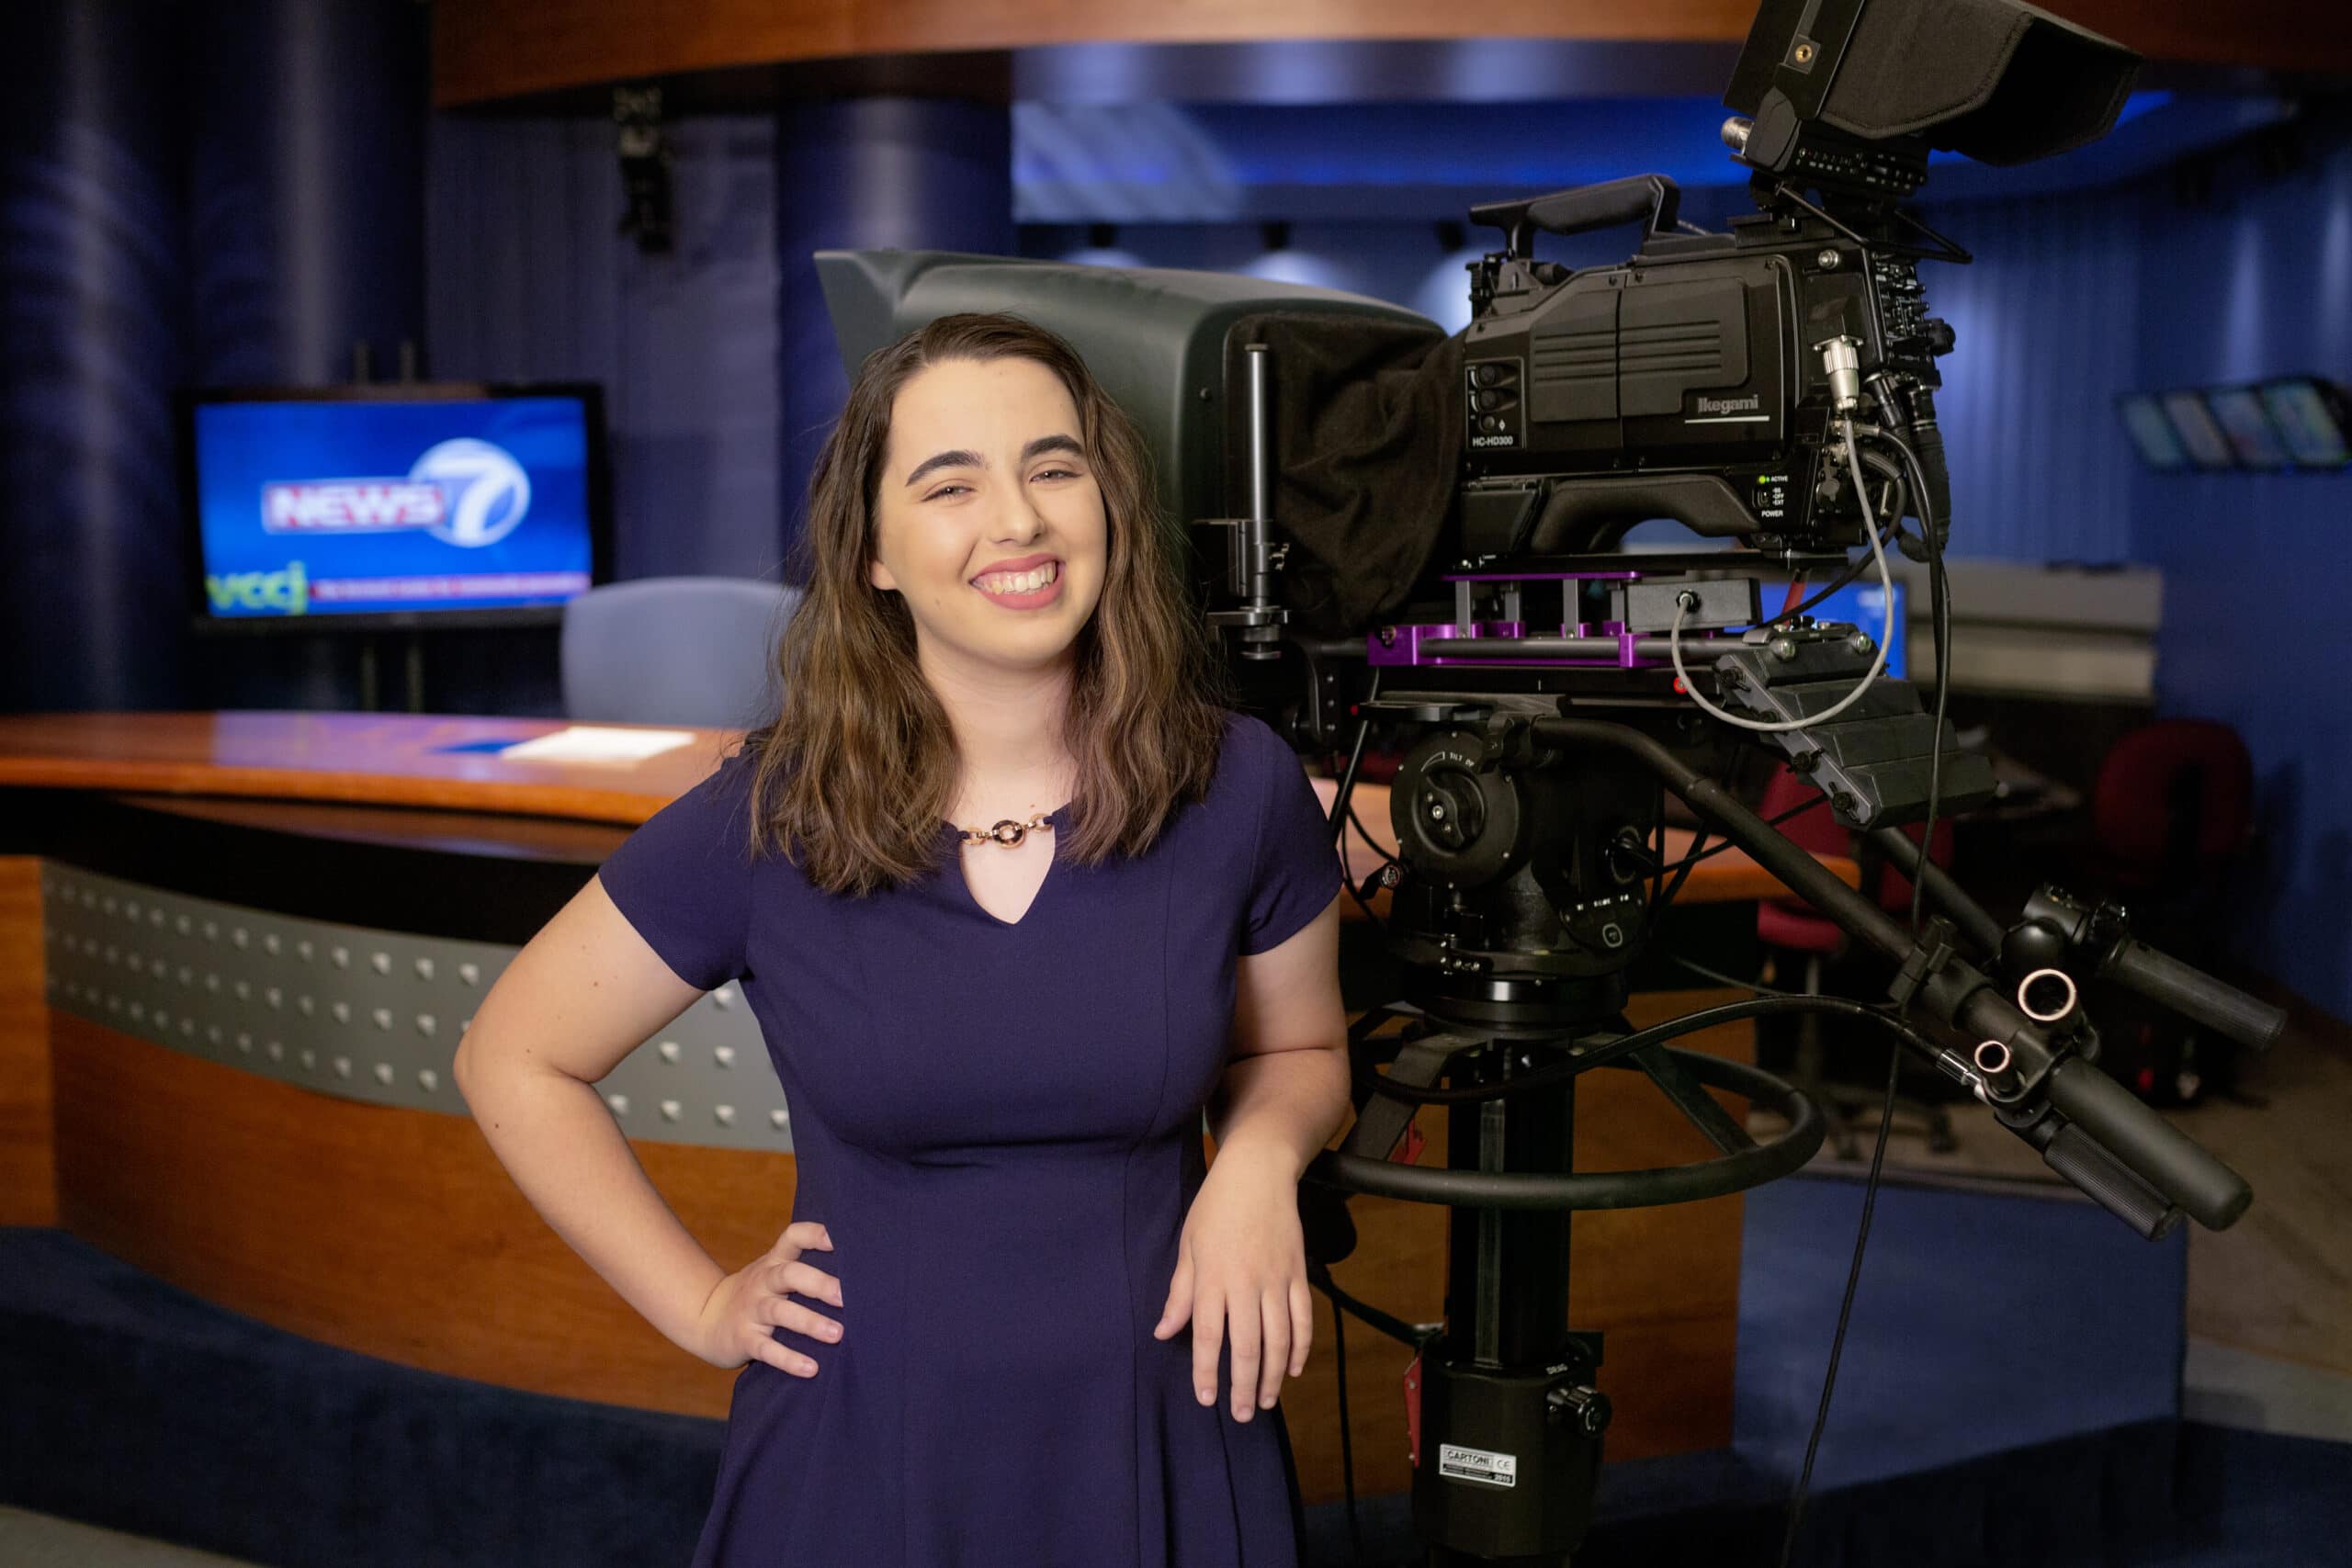 A young woman with long brown hair wears a purple dress while standing in a news studio leaning on a camera.